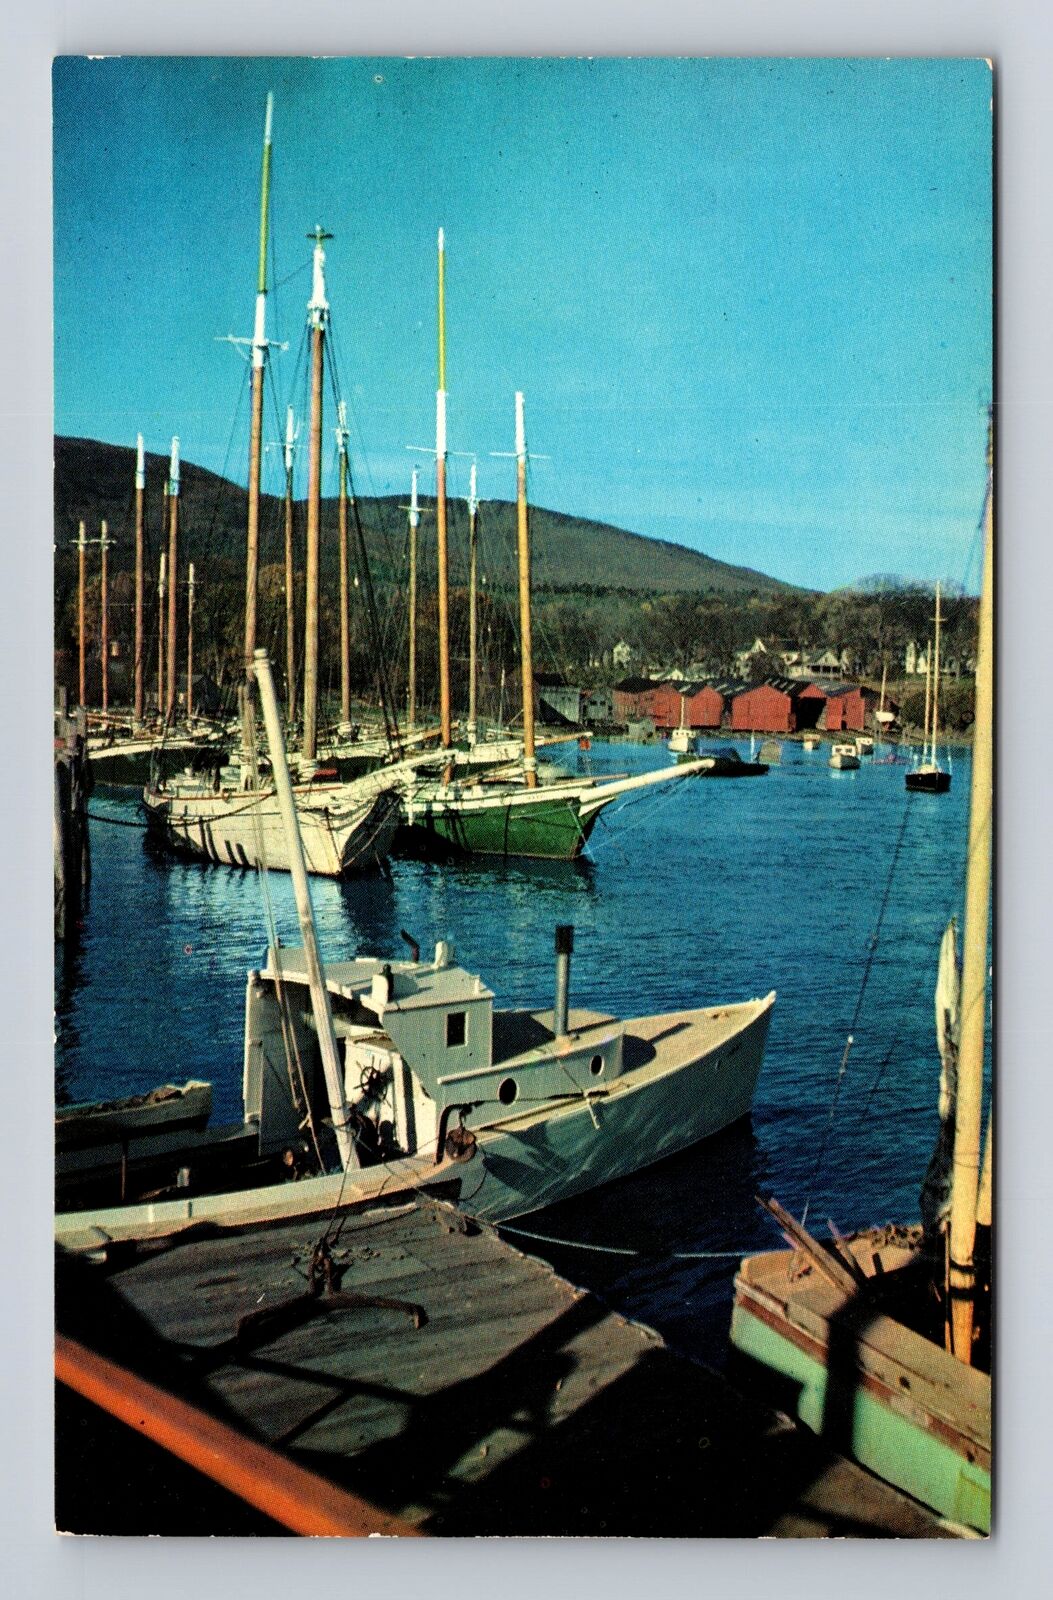 ME-Maine, Cruisers at Anchor in Harbor on Maine Coast, Vintage Souvenir Postcard